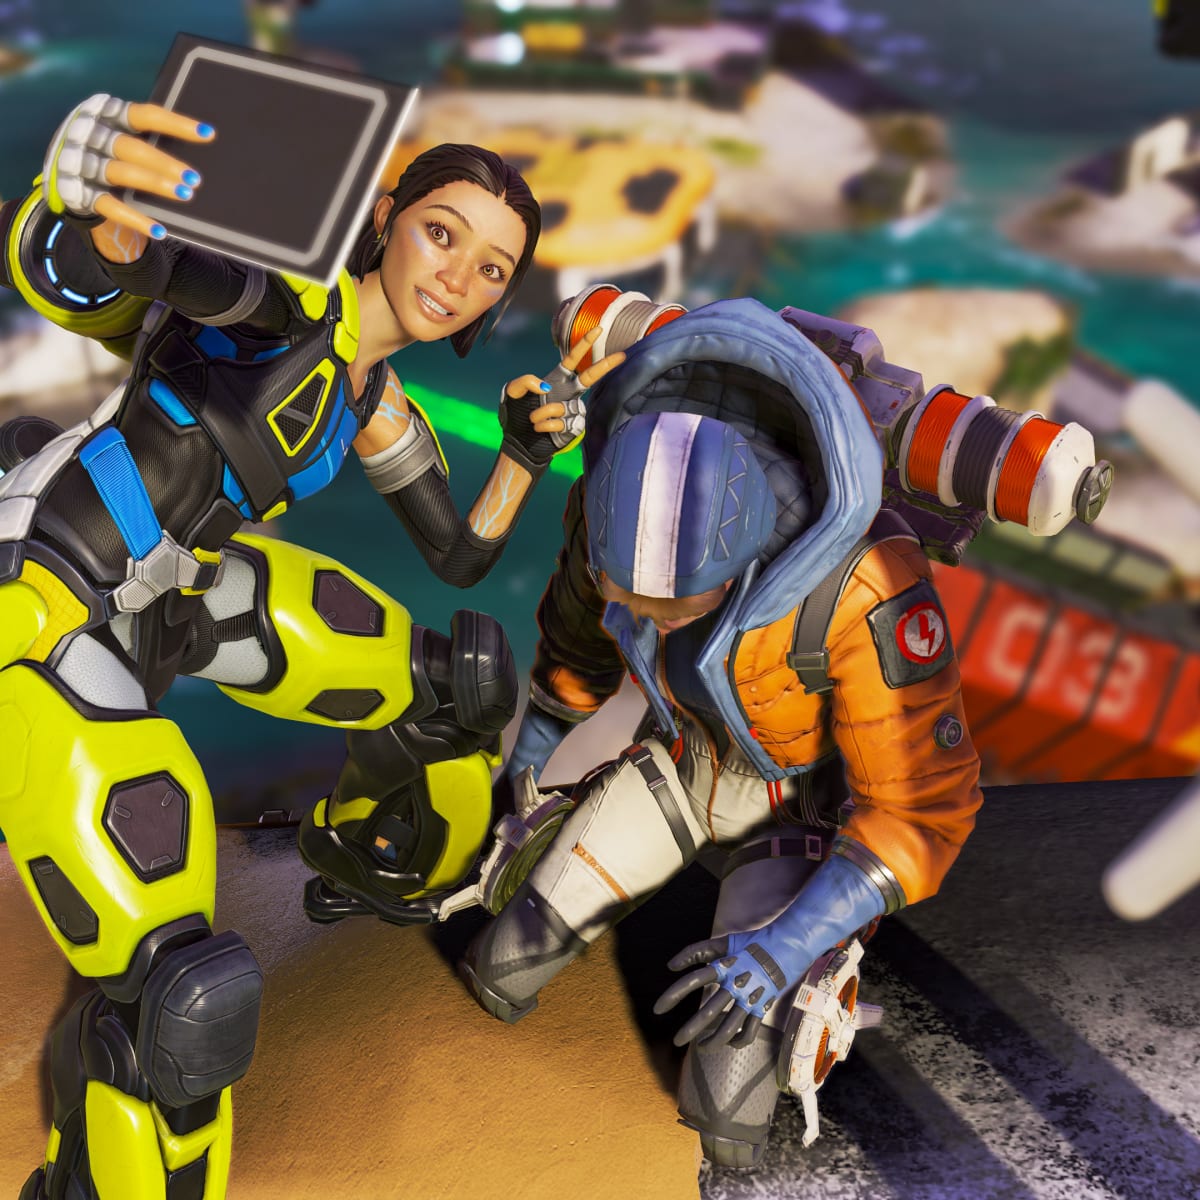 WD teams up with Respawn Entertainment to create Apex Legends memory card -  TECHx Media